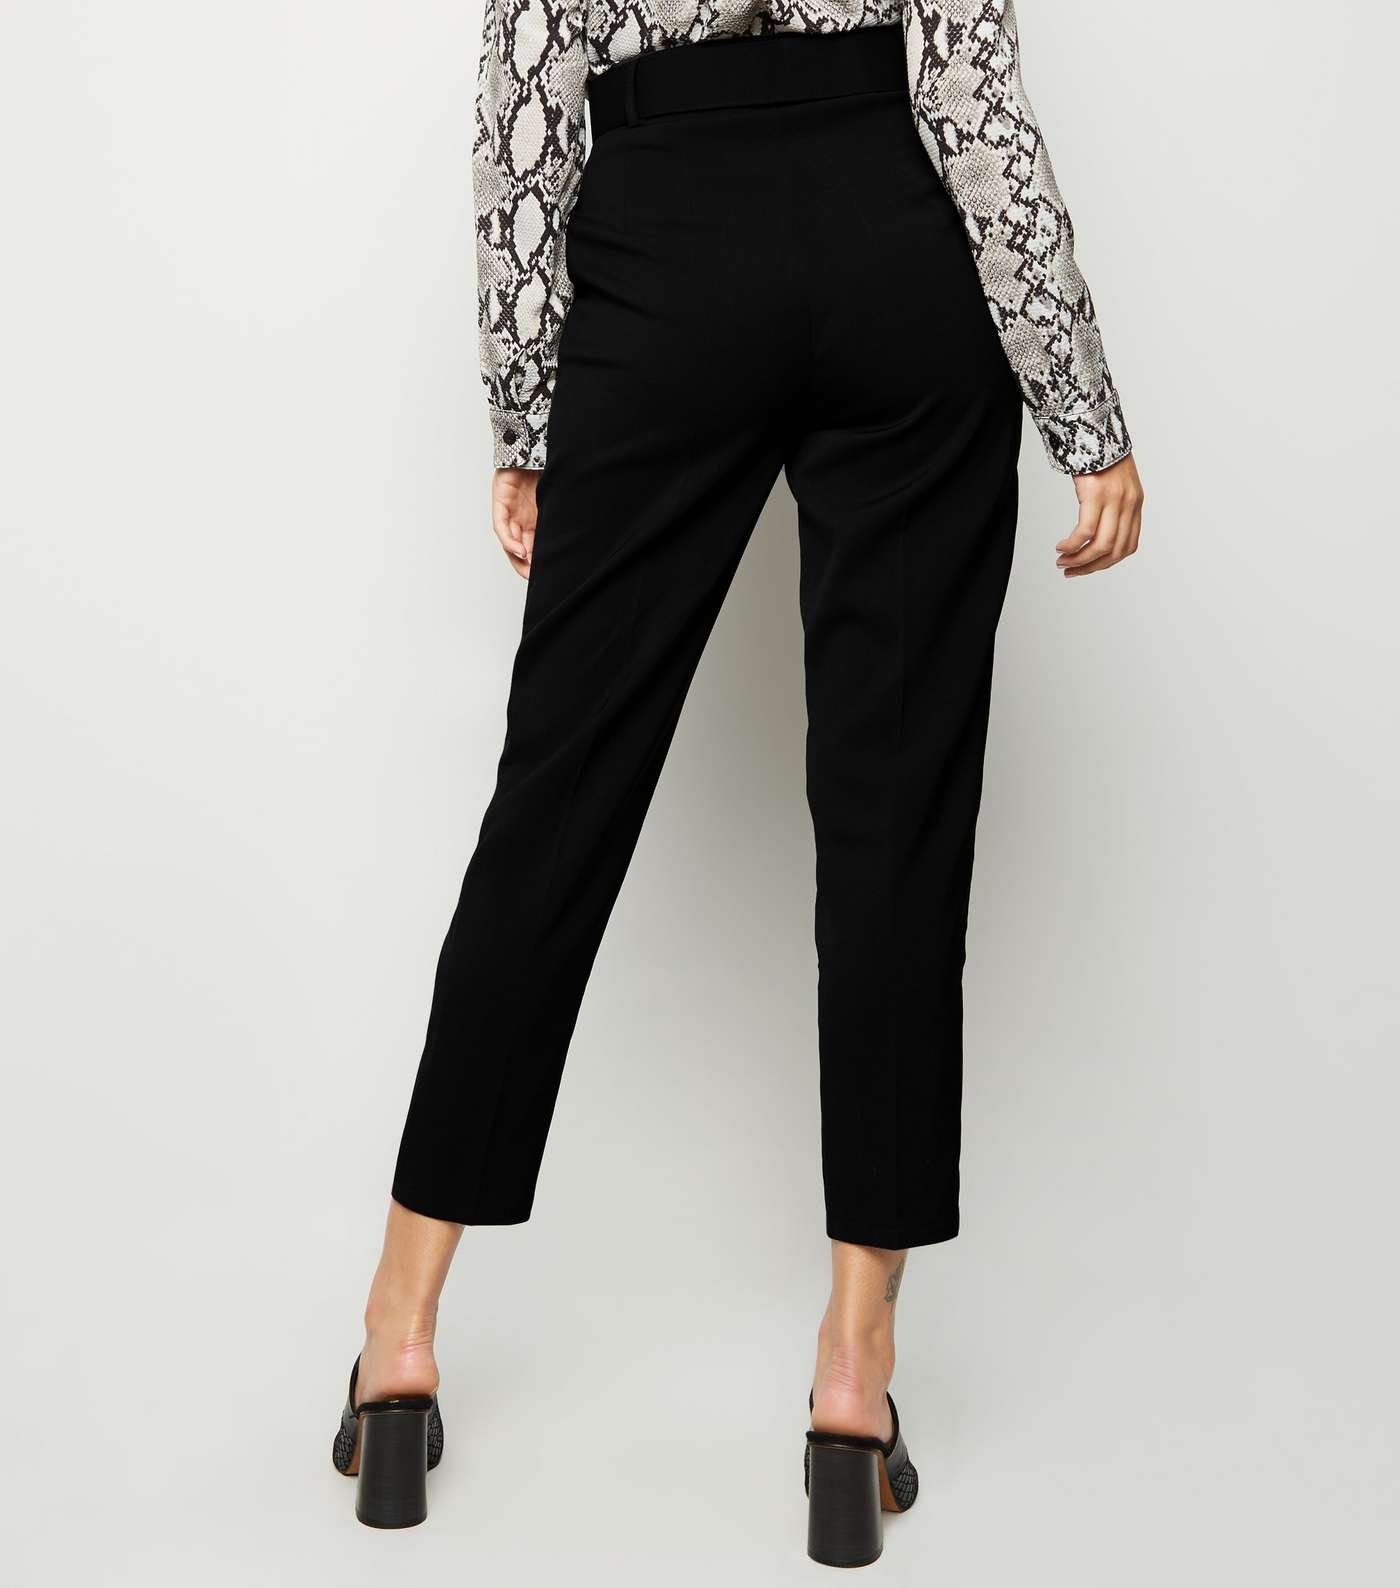 Cameo Black Belted Slim Leg Trousers Image 3